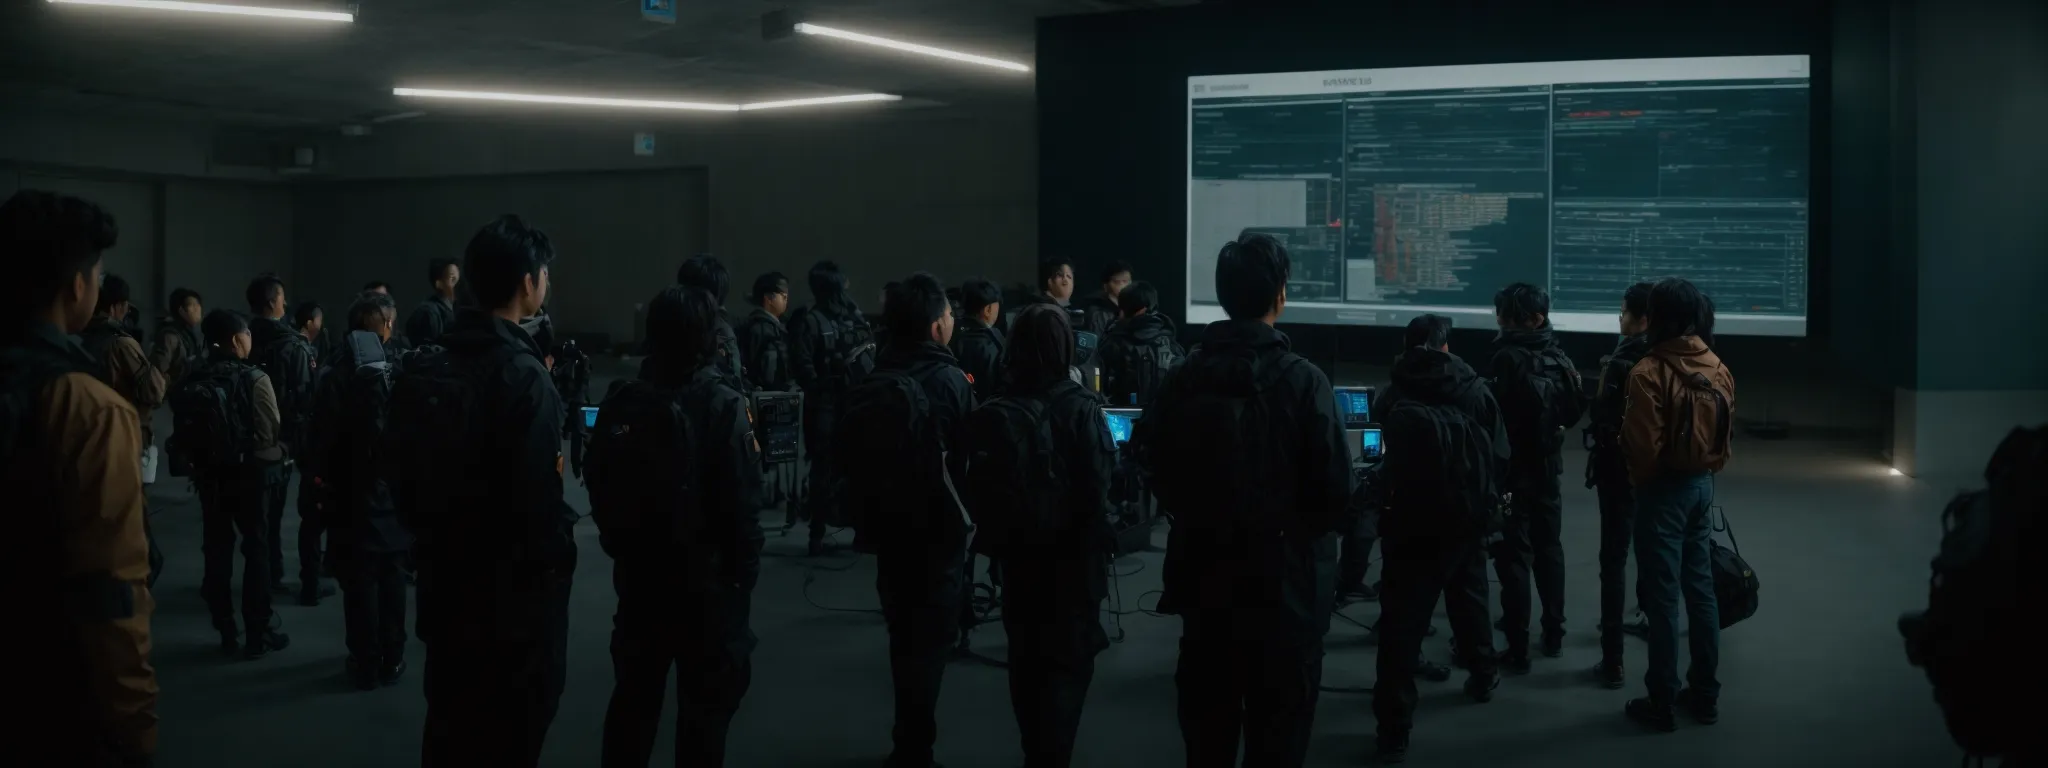 a team gathers around a large digital screen, interacting with a collaborative software interface.